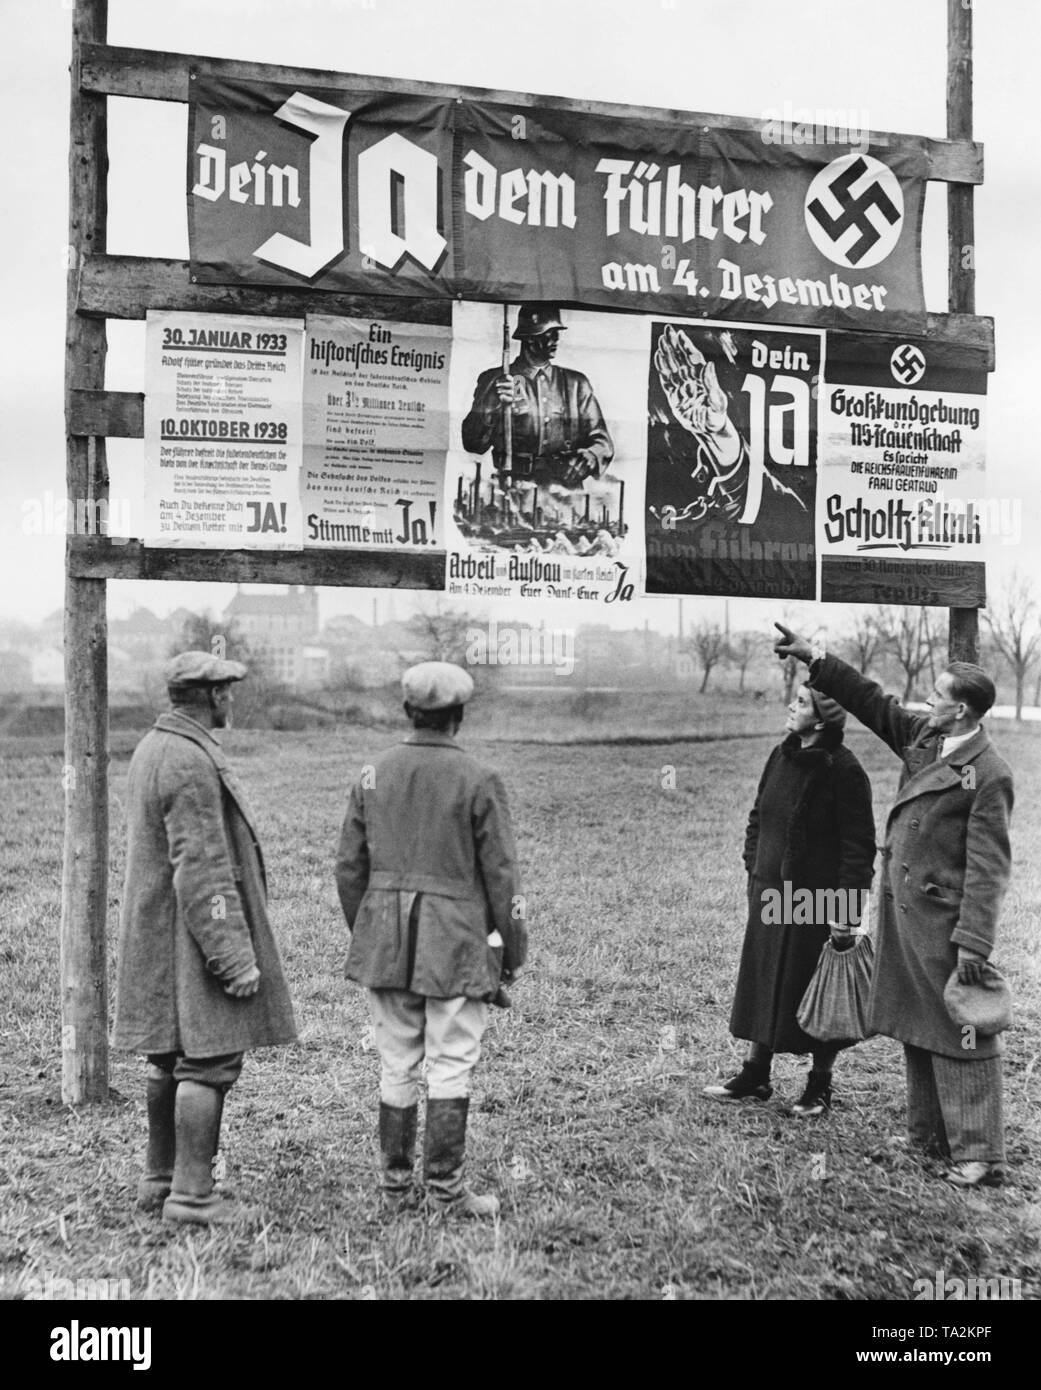 Sudeten Germans observing the election posters for the plebiscite. The Sudeten Germans cast their vote concerning the annexation of the Sudetenland to the German Reich. On the upper poster: 'Your Yes for the Fuehrer on 4 December'. Stock Photo